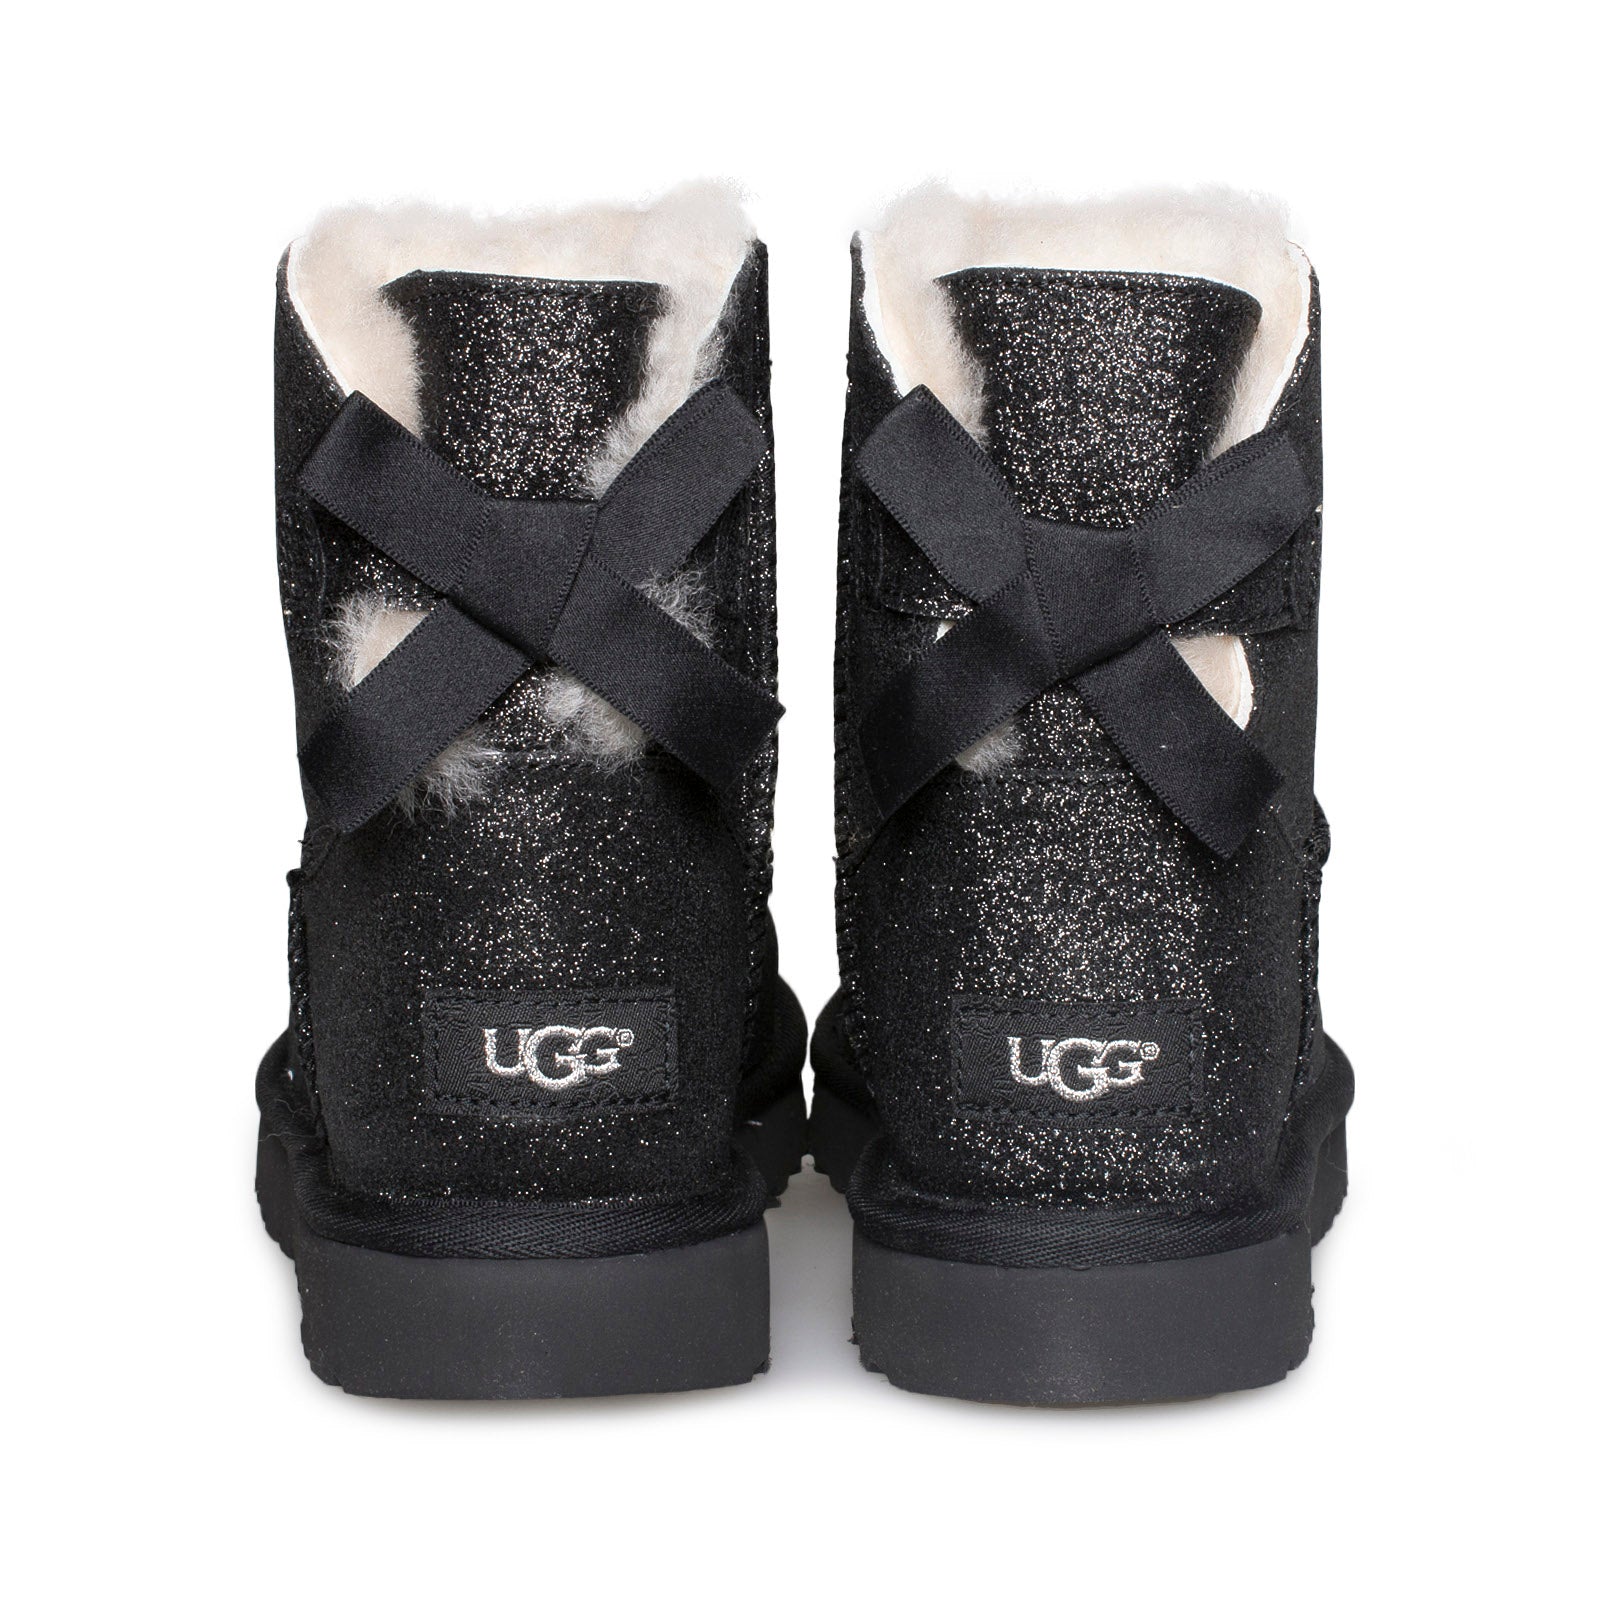 black glitter uggs with bows